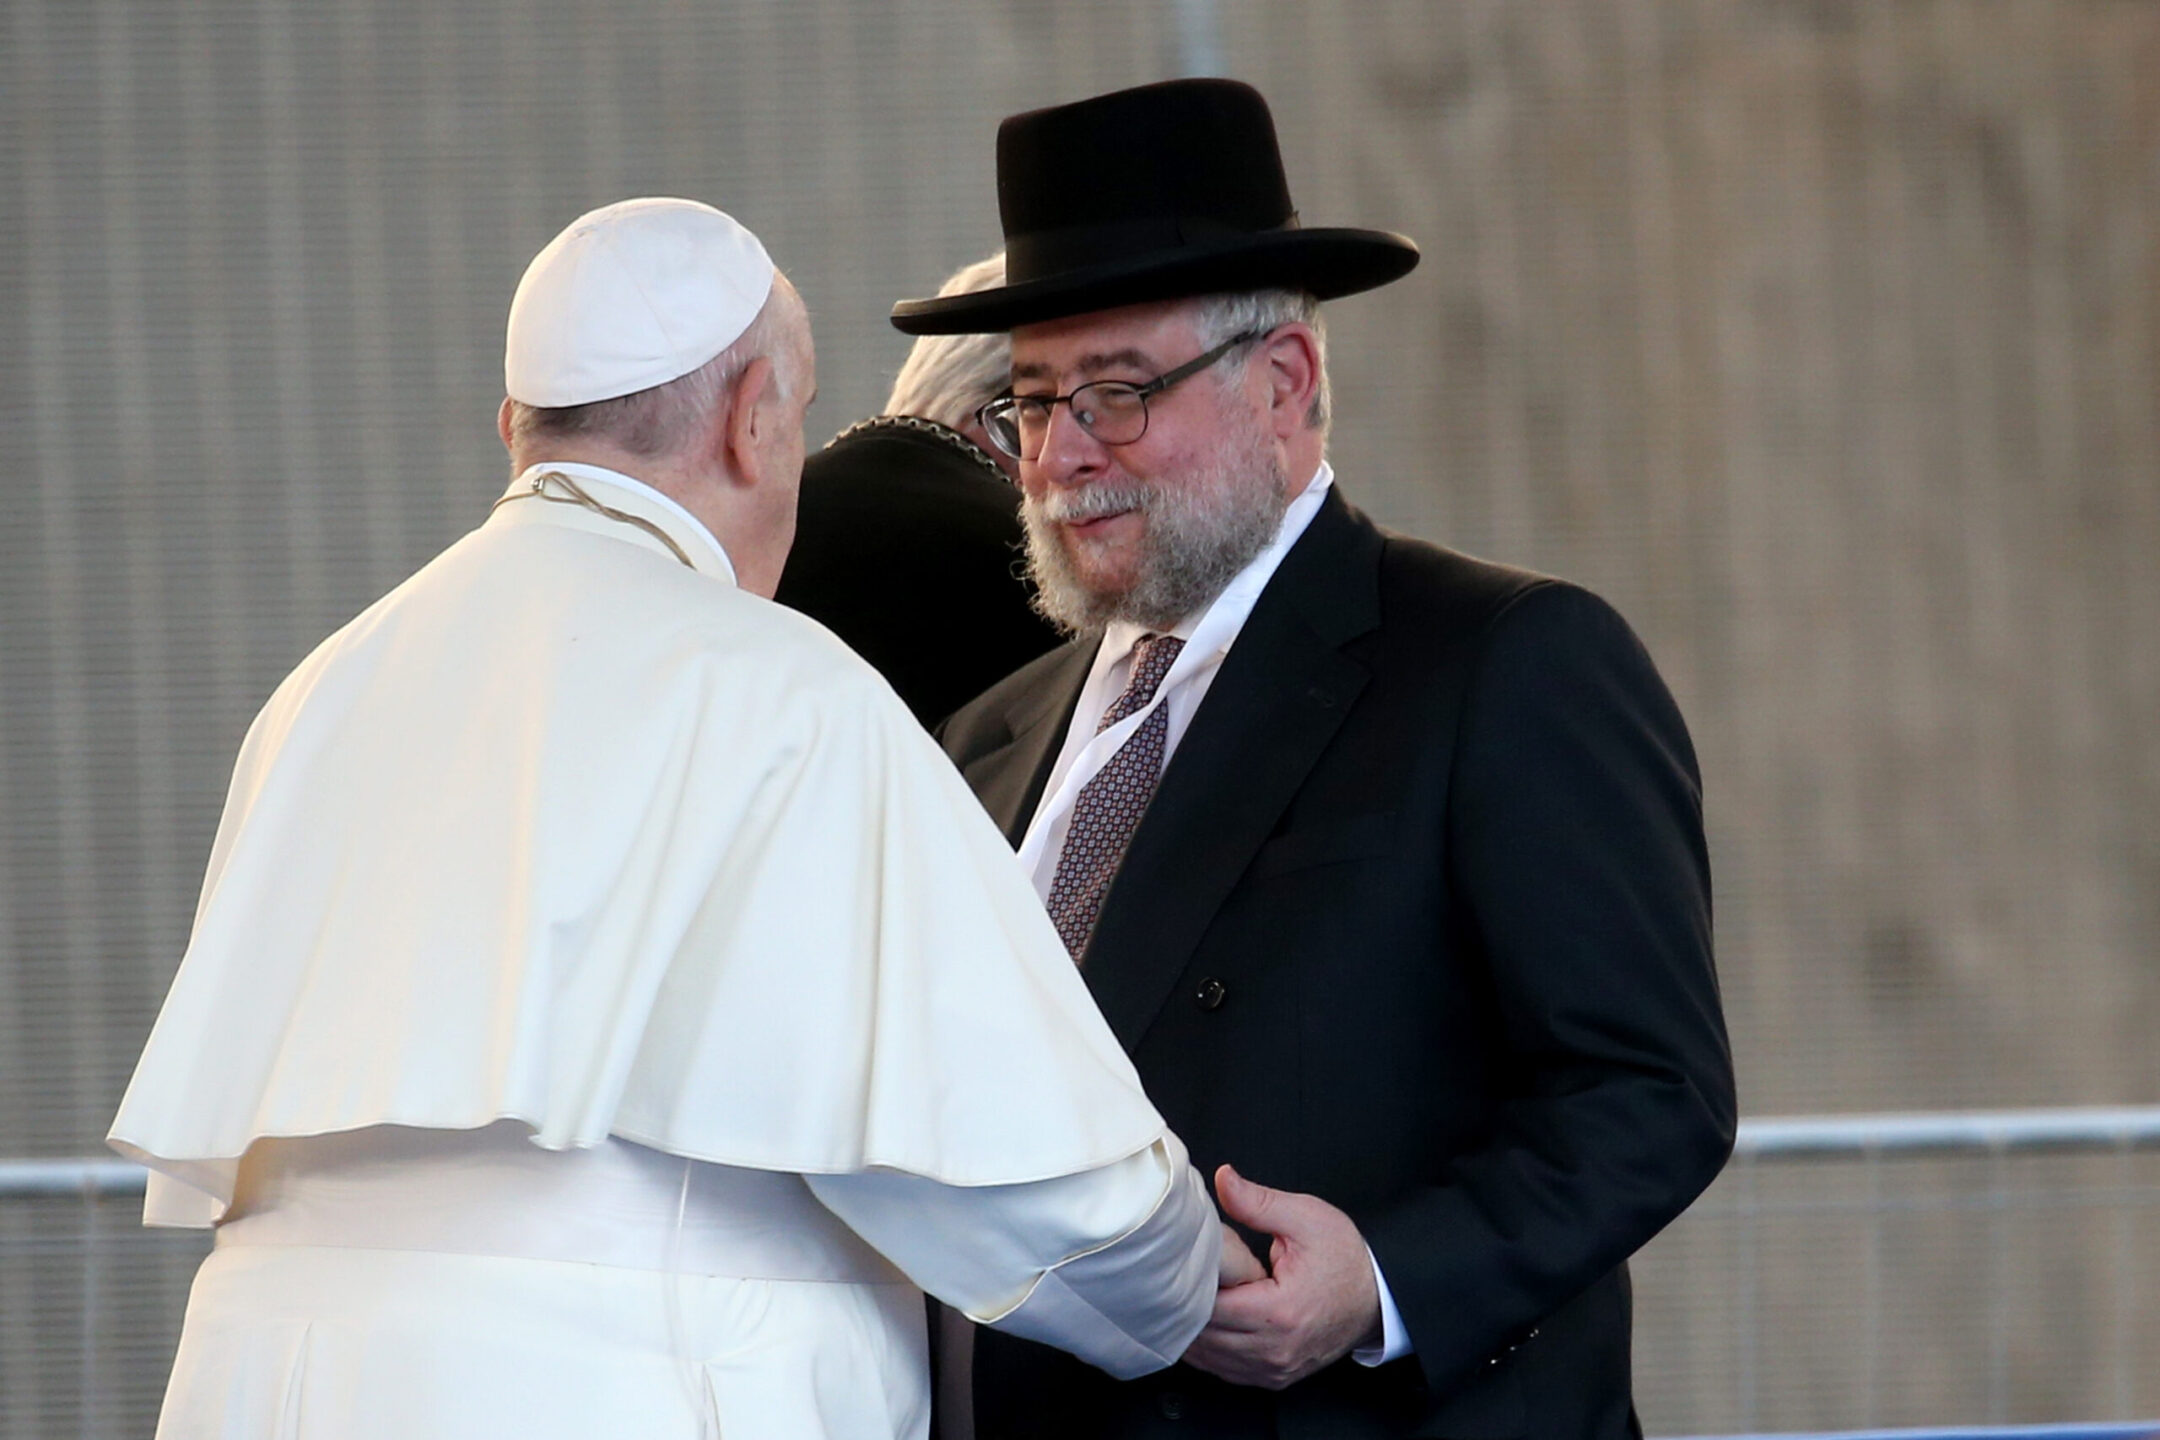 Pope Francis greets Rabbi Pinchas Goldschmidt during an International Meeting for Peace in Rome, Oct. 7, 2021. (Franco Origlia/Getty Images)